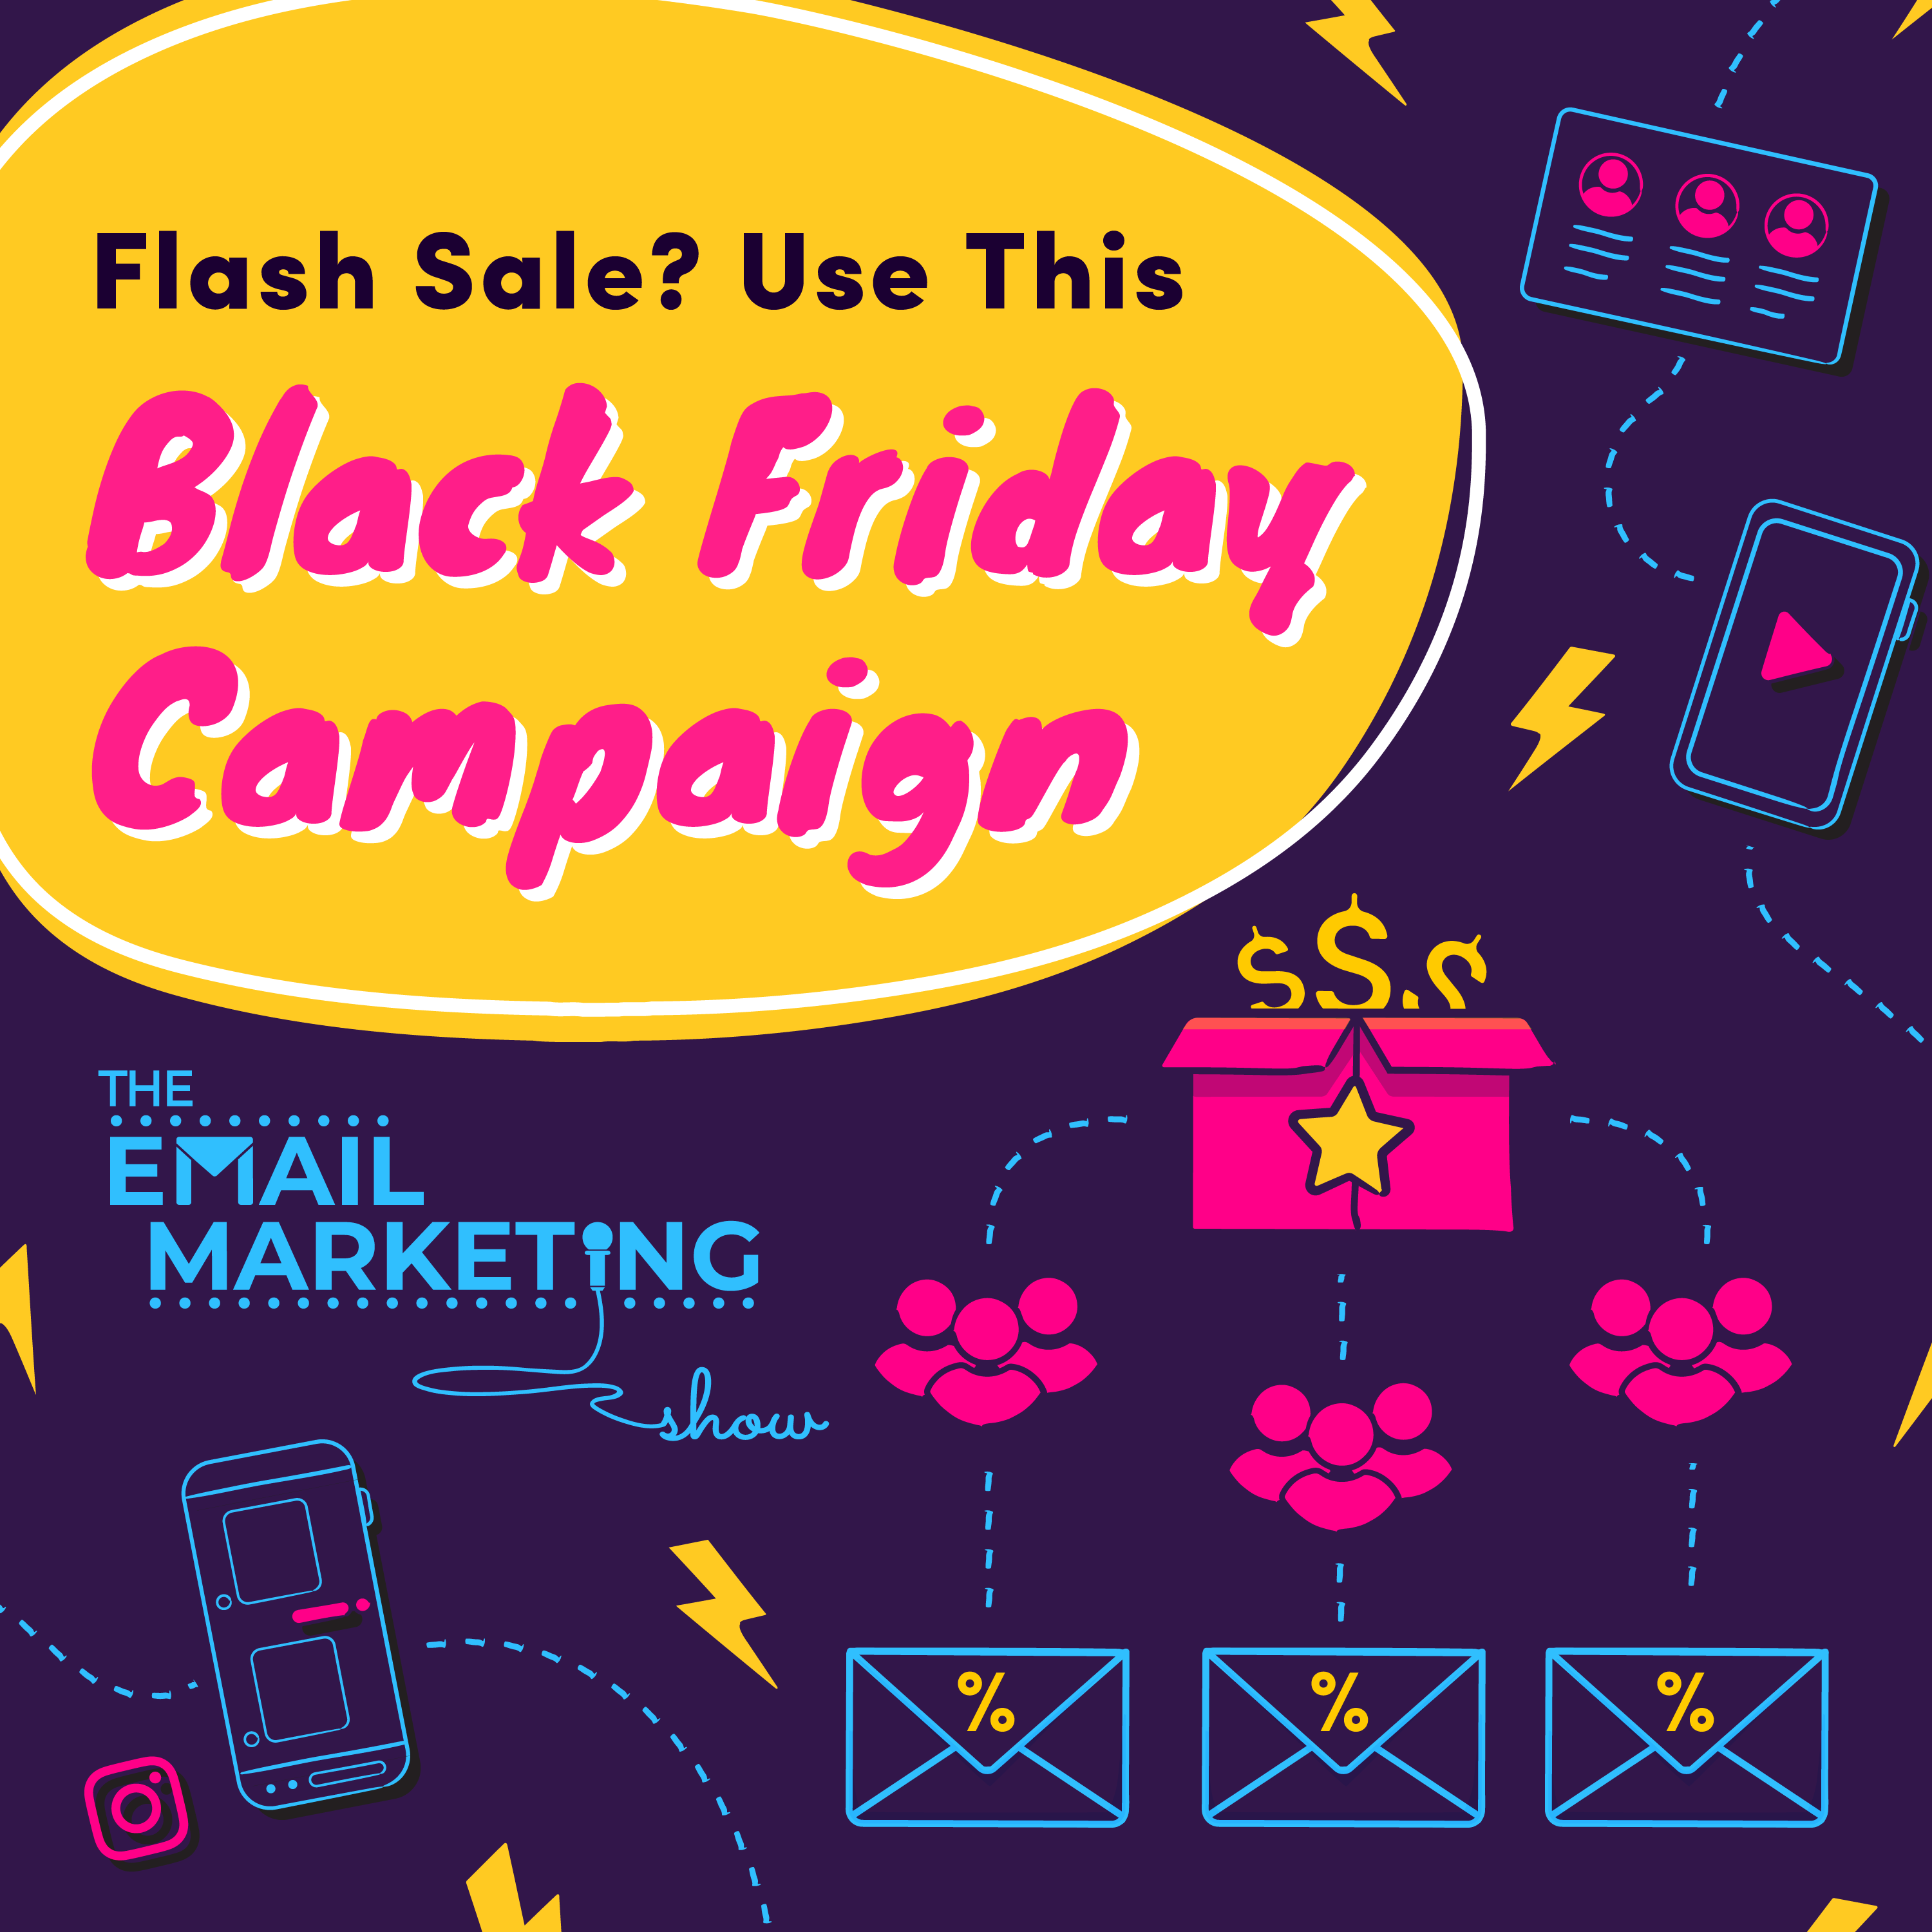 Smash Your Flash Sale Black Friday Campaign, With Natalie Ellis from BossBabe